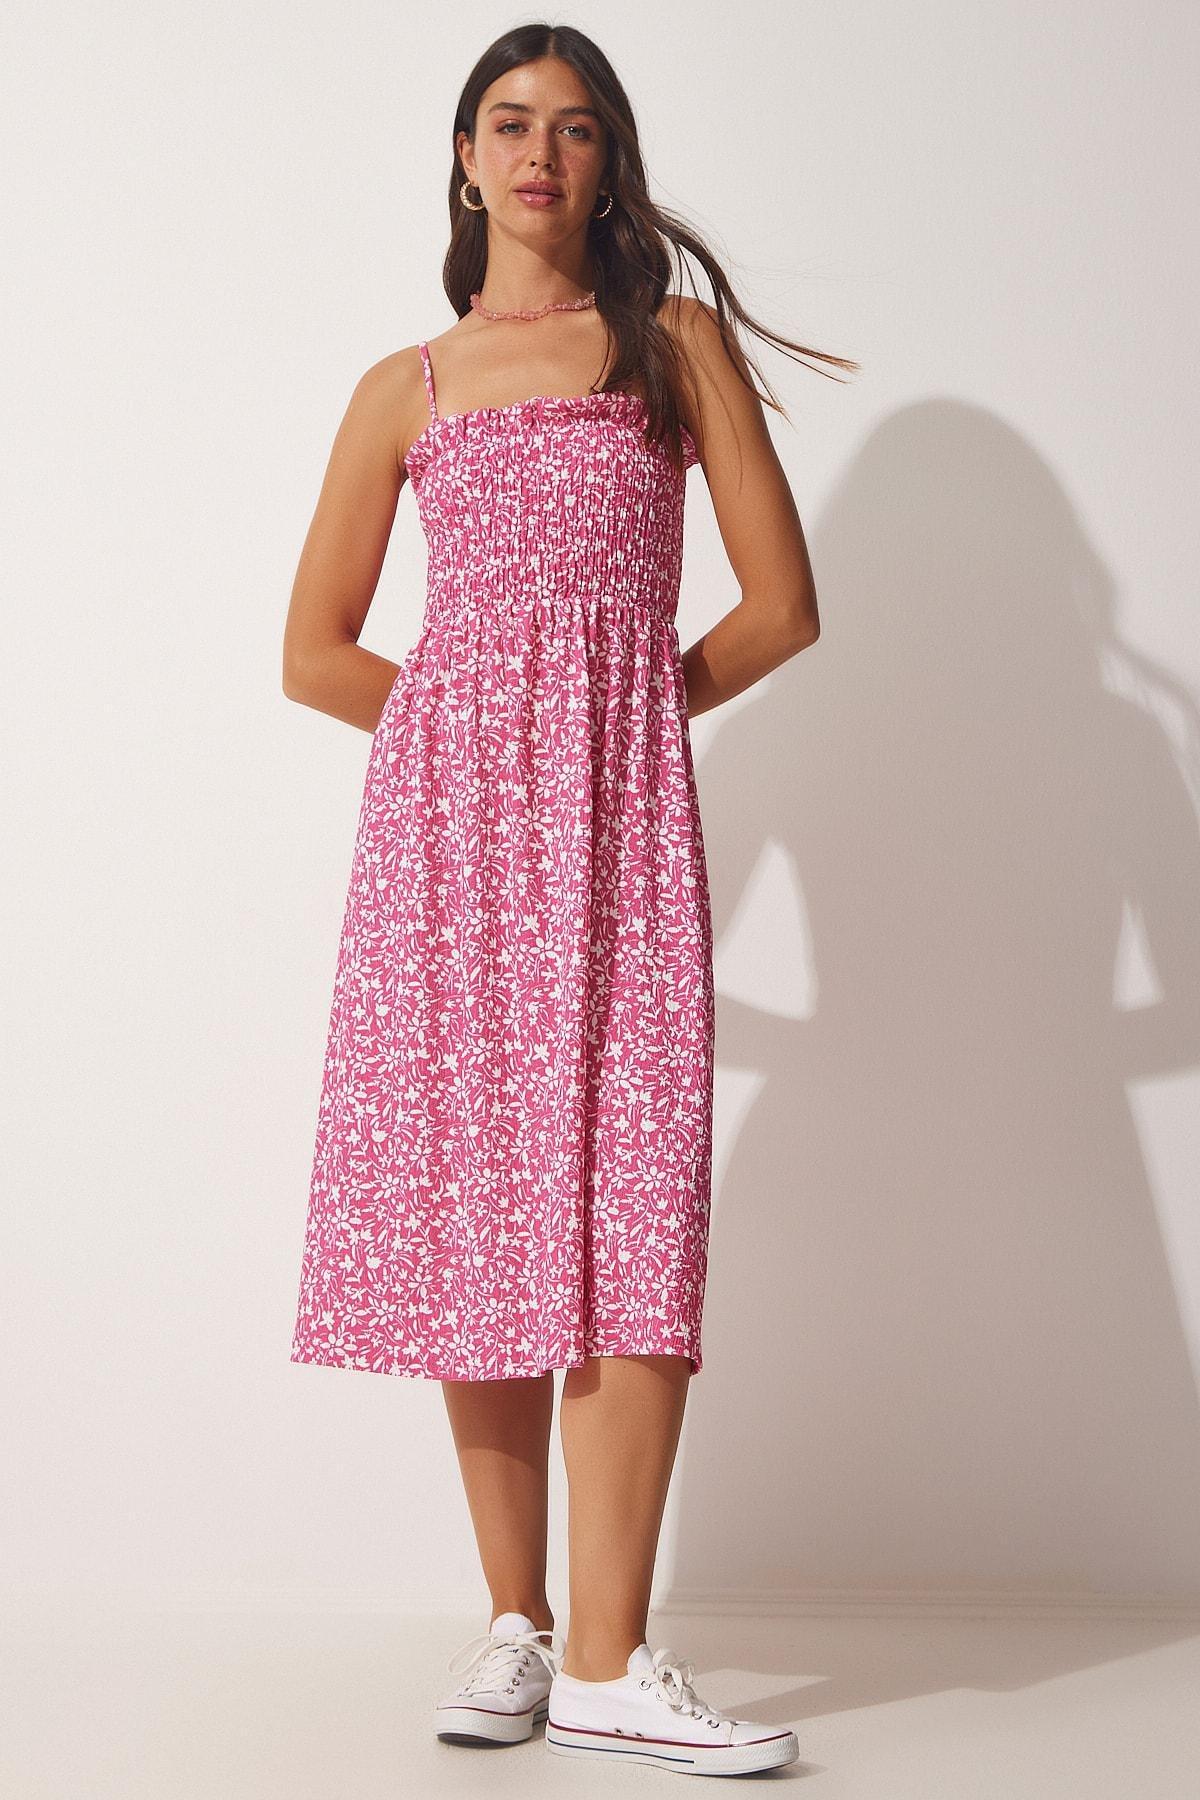 Happiness Istanbul - Pink Floral A-Line Dress